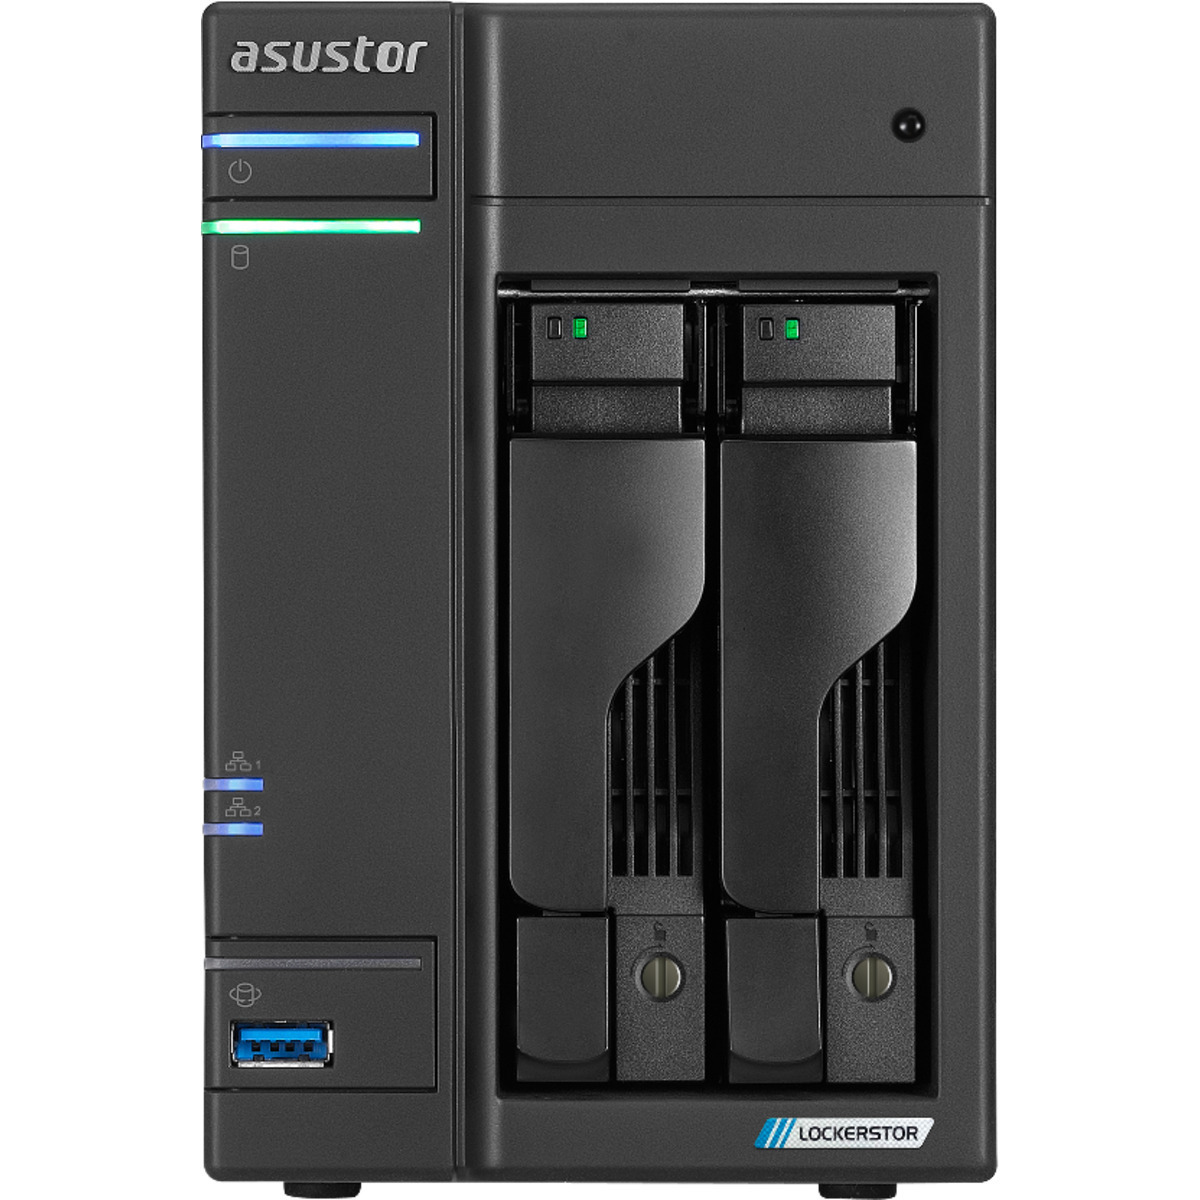 ASUSTOR LOCKERSTOR 2 Gen2 AS6702T 12tb 2-Bay Desktop Multimedia / Power User / Business NAS - Network Attached Storage Device 2x6tb Seagate IronWolf ST6000VN006 3.5 5400rpm SATA 6Gb/s HDD NAS Class Drives Installed - Burn-In Tested - FREE RAM UPGRADE LOCKERSTOR 2 Gen2 AS6702T